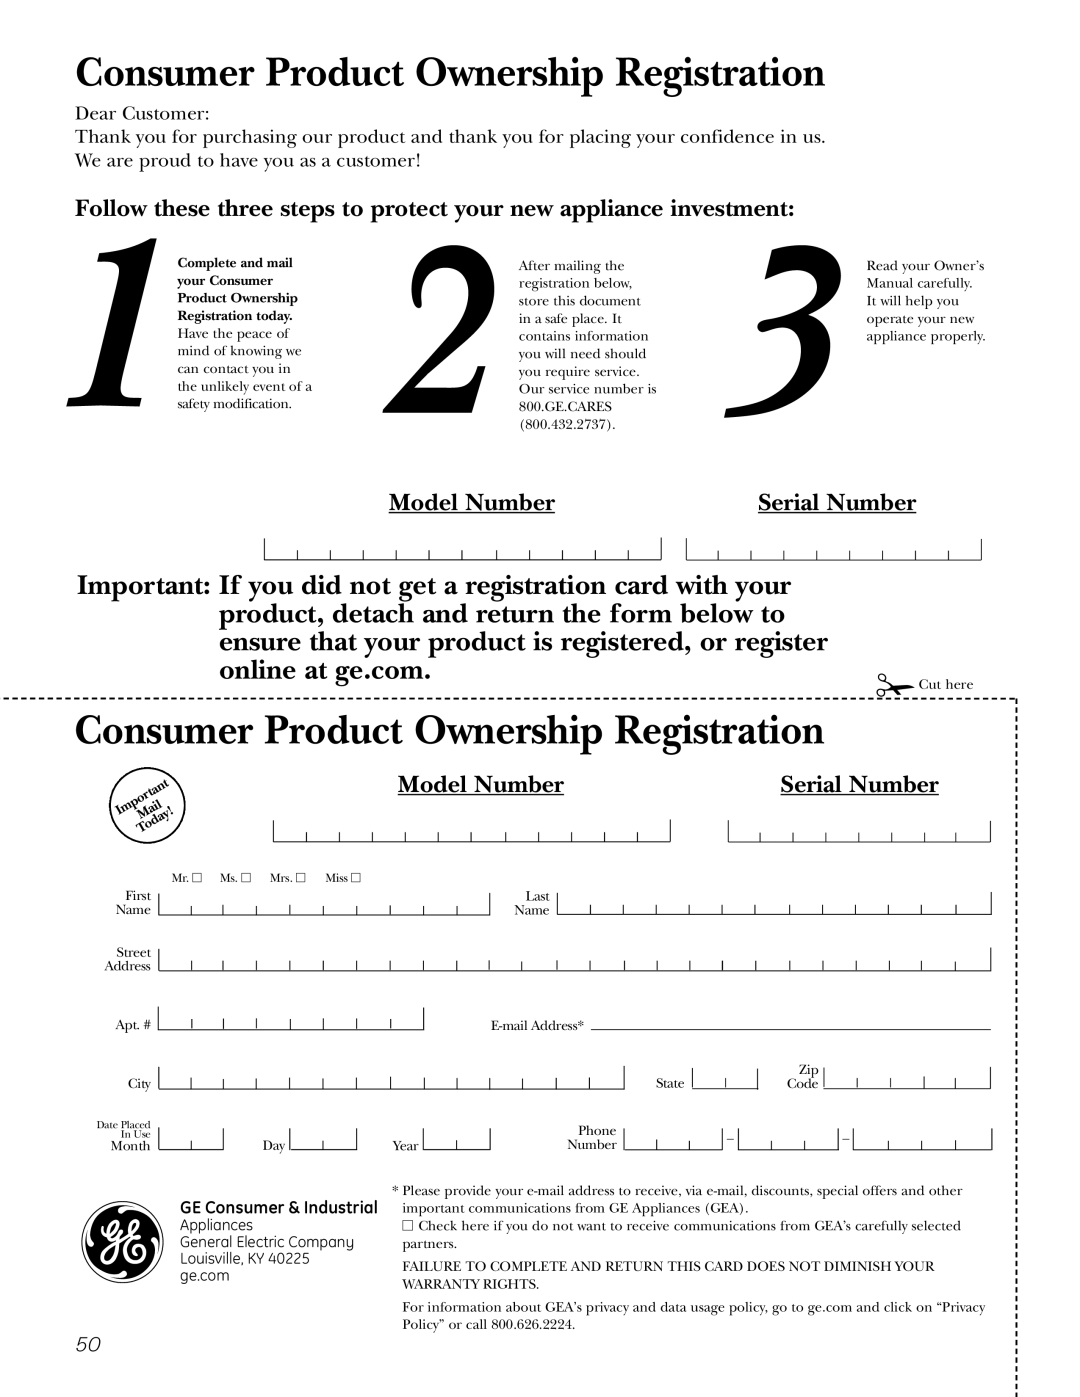 Hotpoint JBS07 Model Number, Serial Number, Consumer Product Ownership Registration, online at ge.com, Complete and mail 